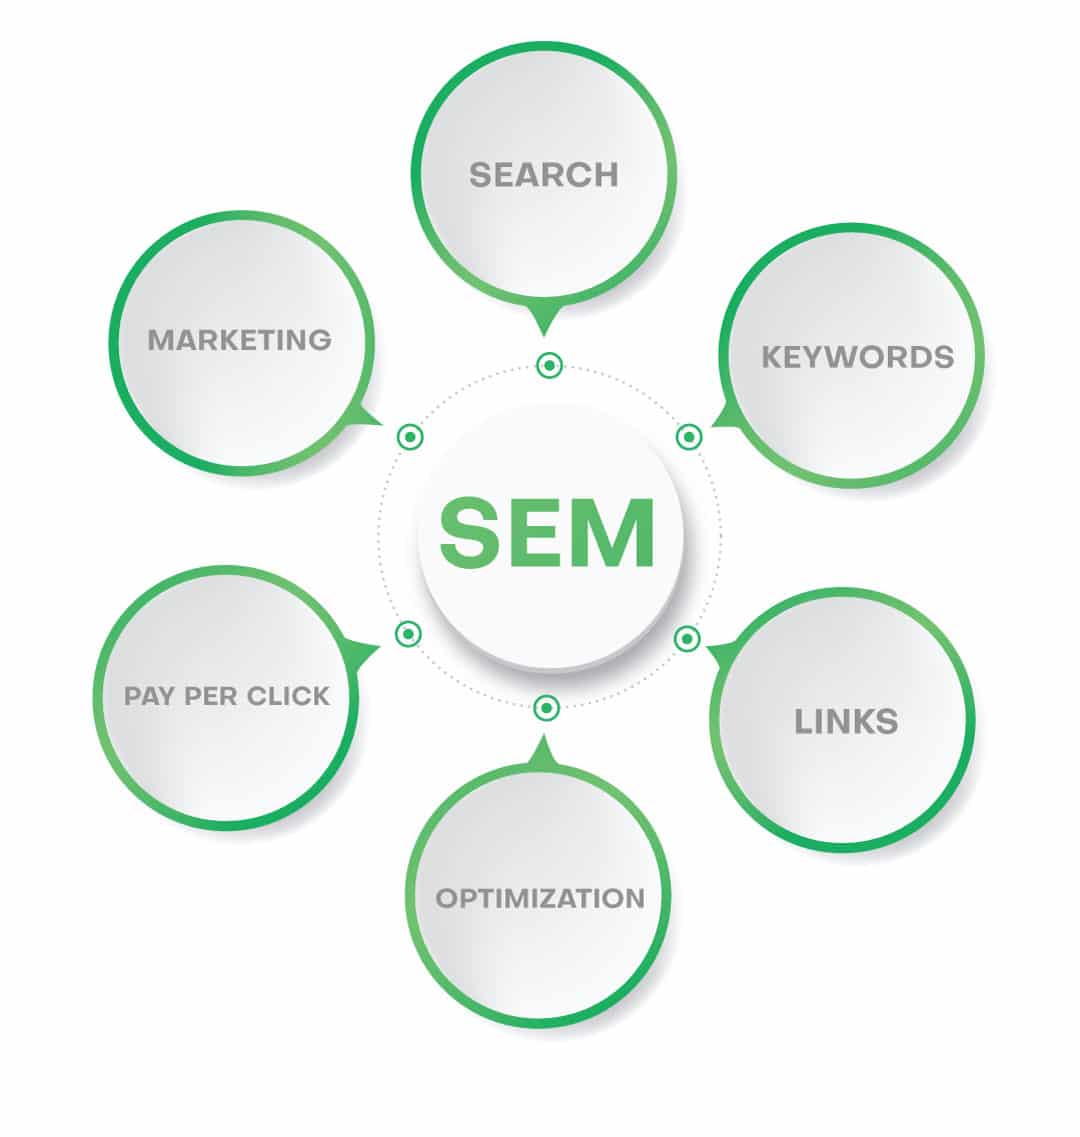 Illustration of end to end process involved in Search Engine Marketing